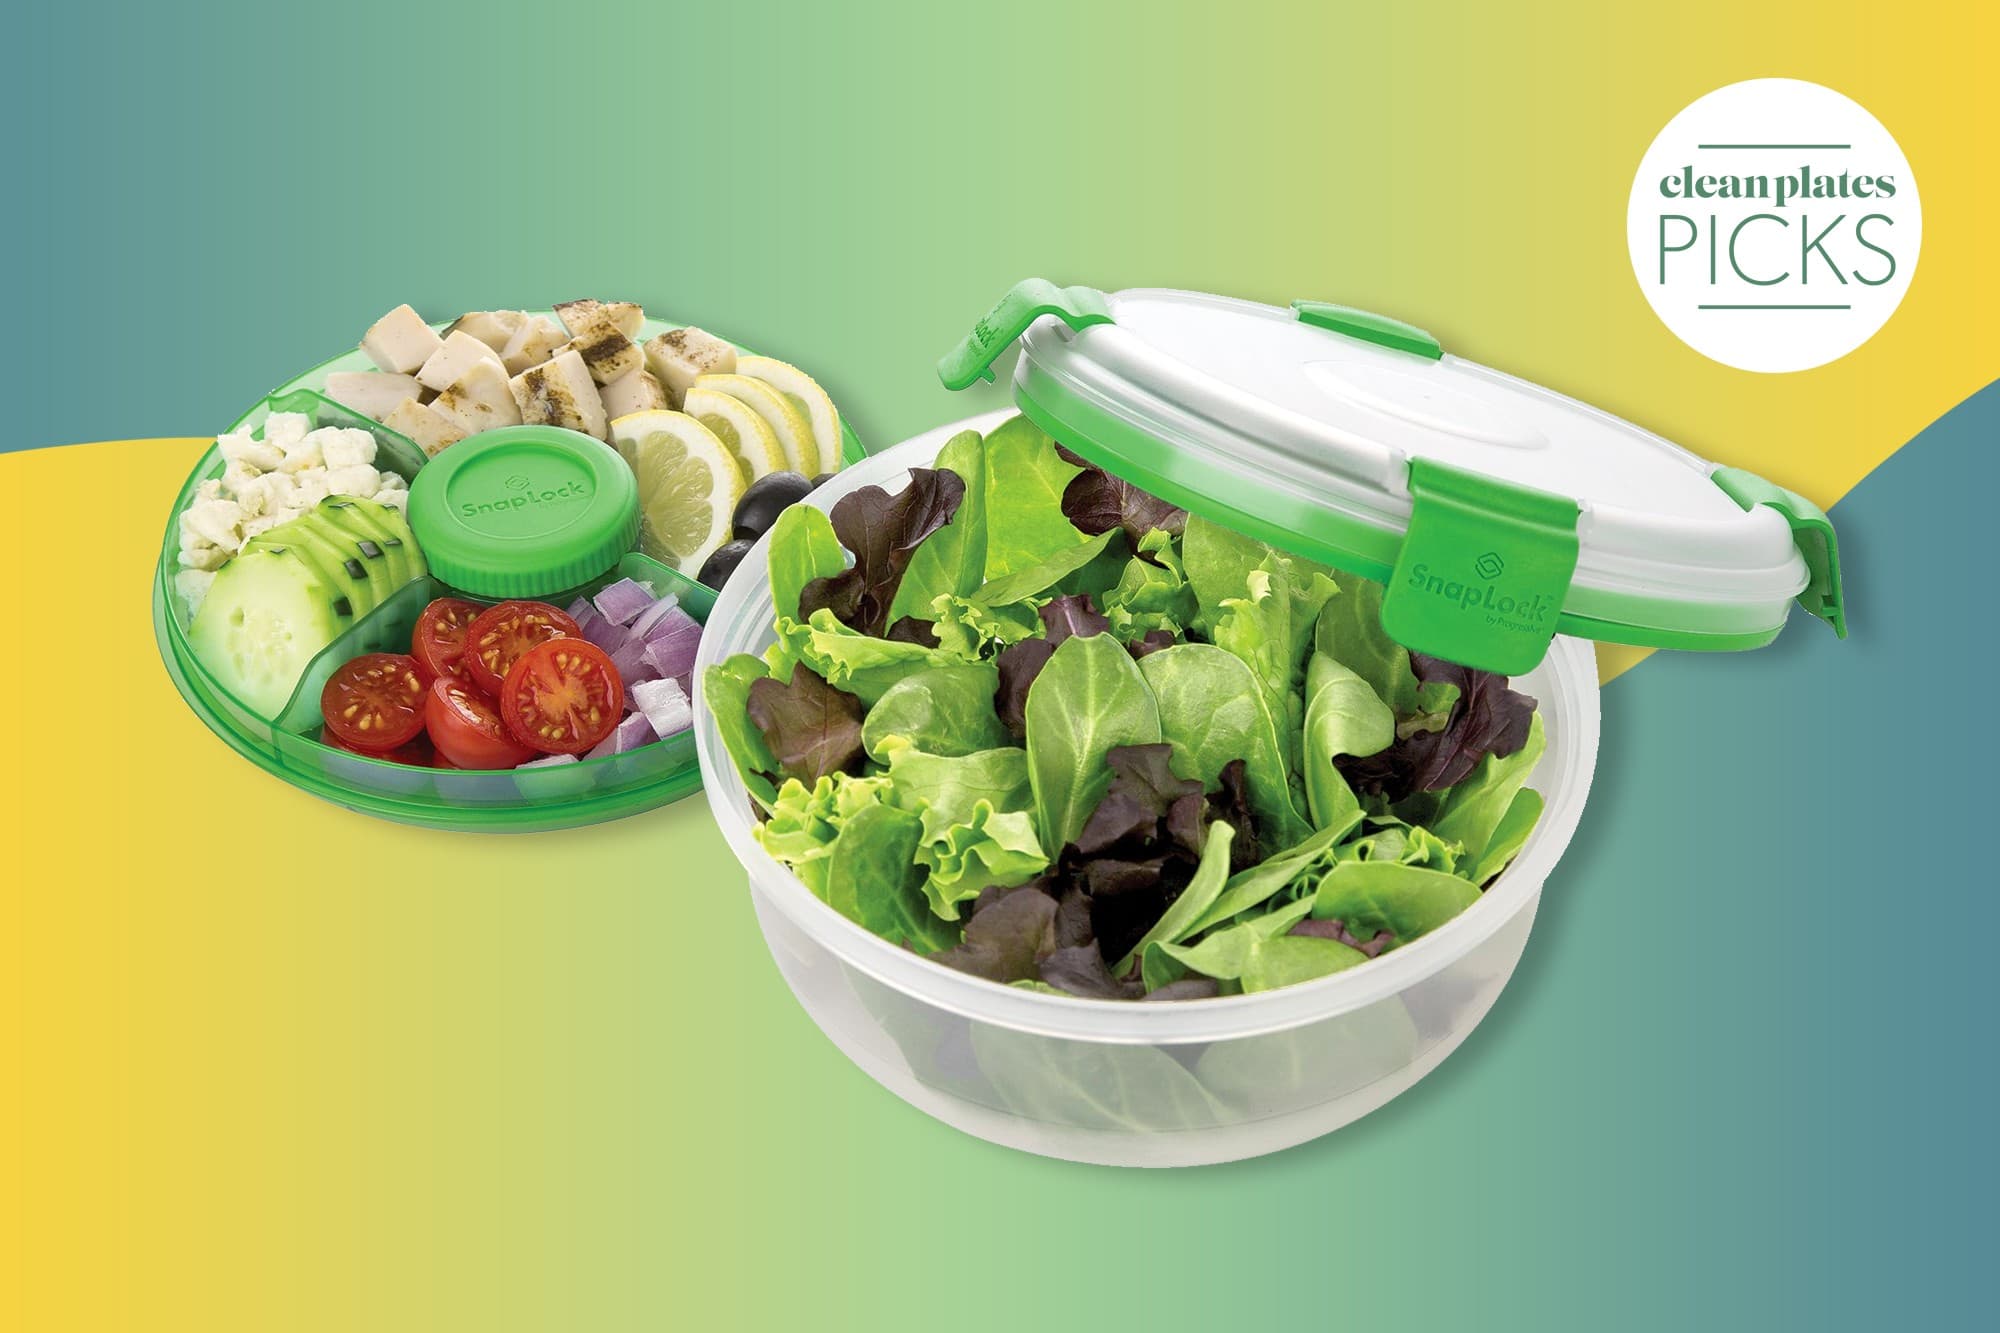 This $8 Salad Container Is the Only One You'll Ever Need